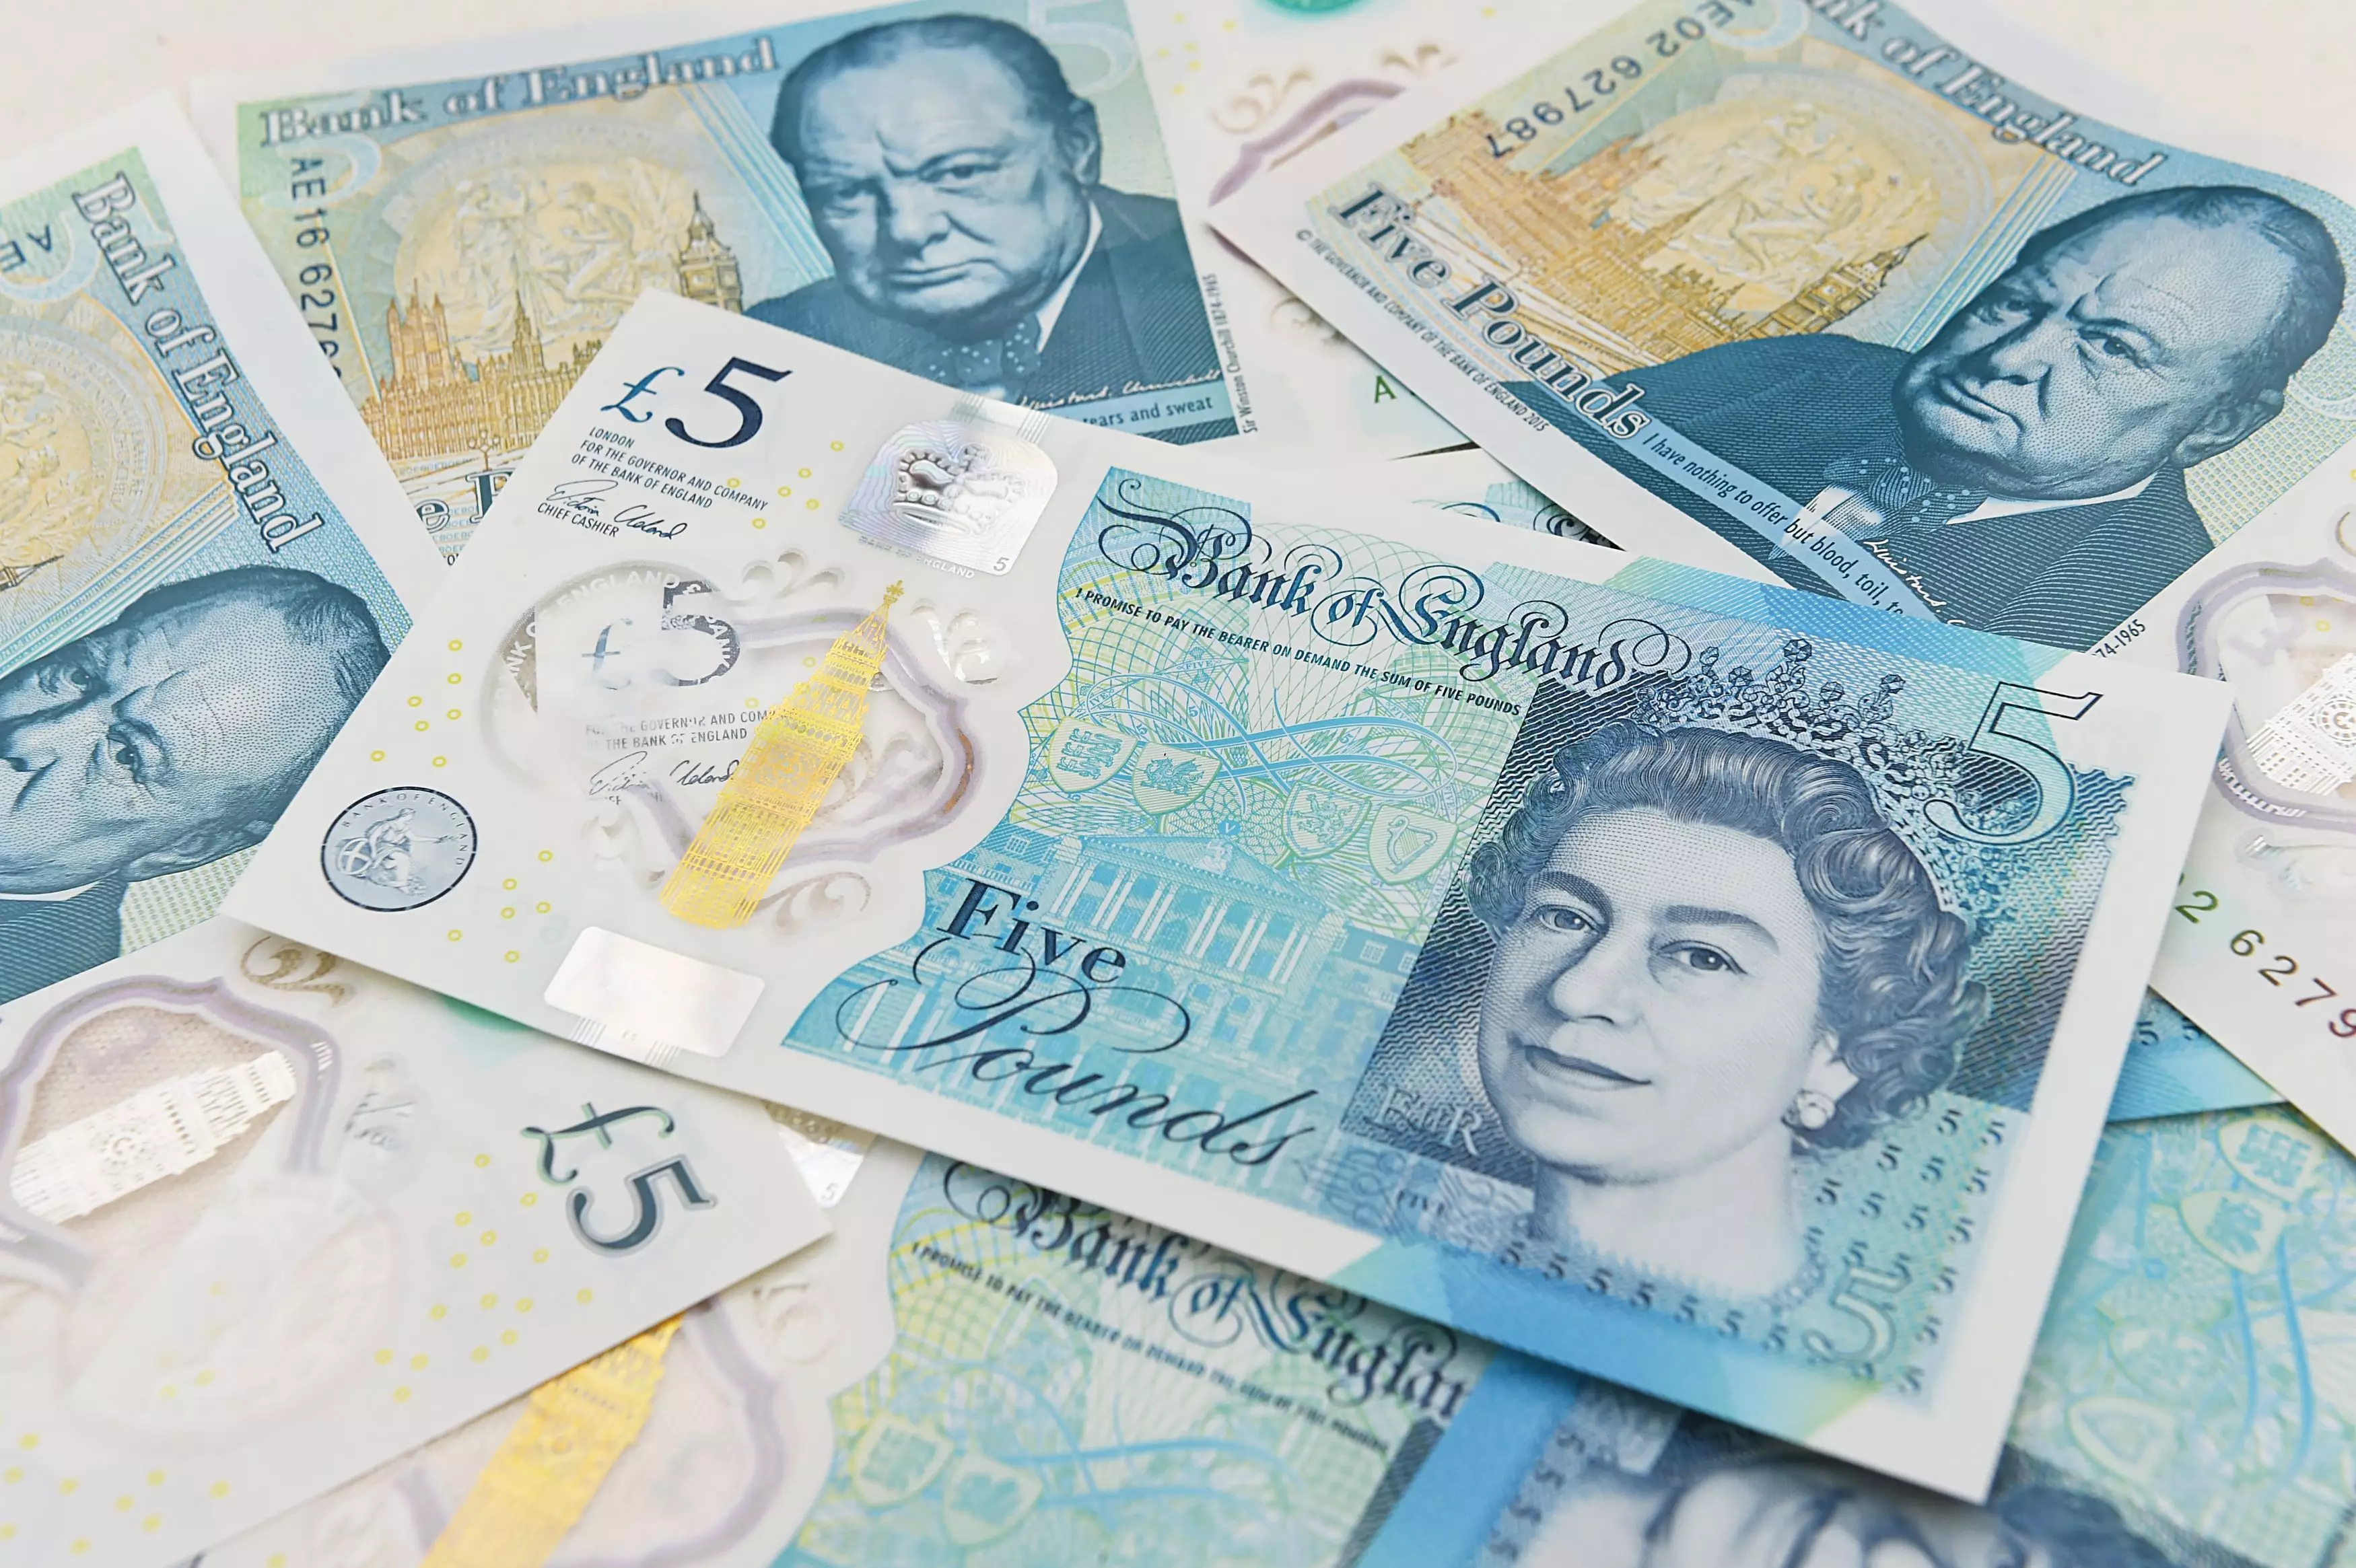 A New Campaign Means People Are Donating Their First Polymer Fiver To Charity